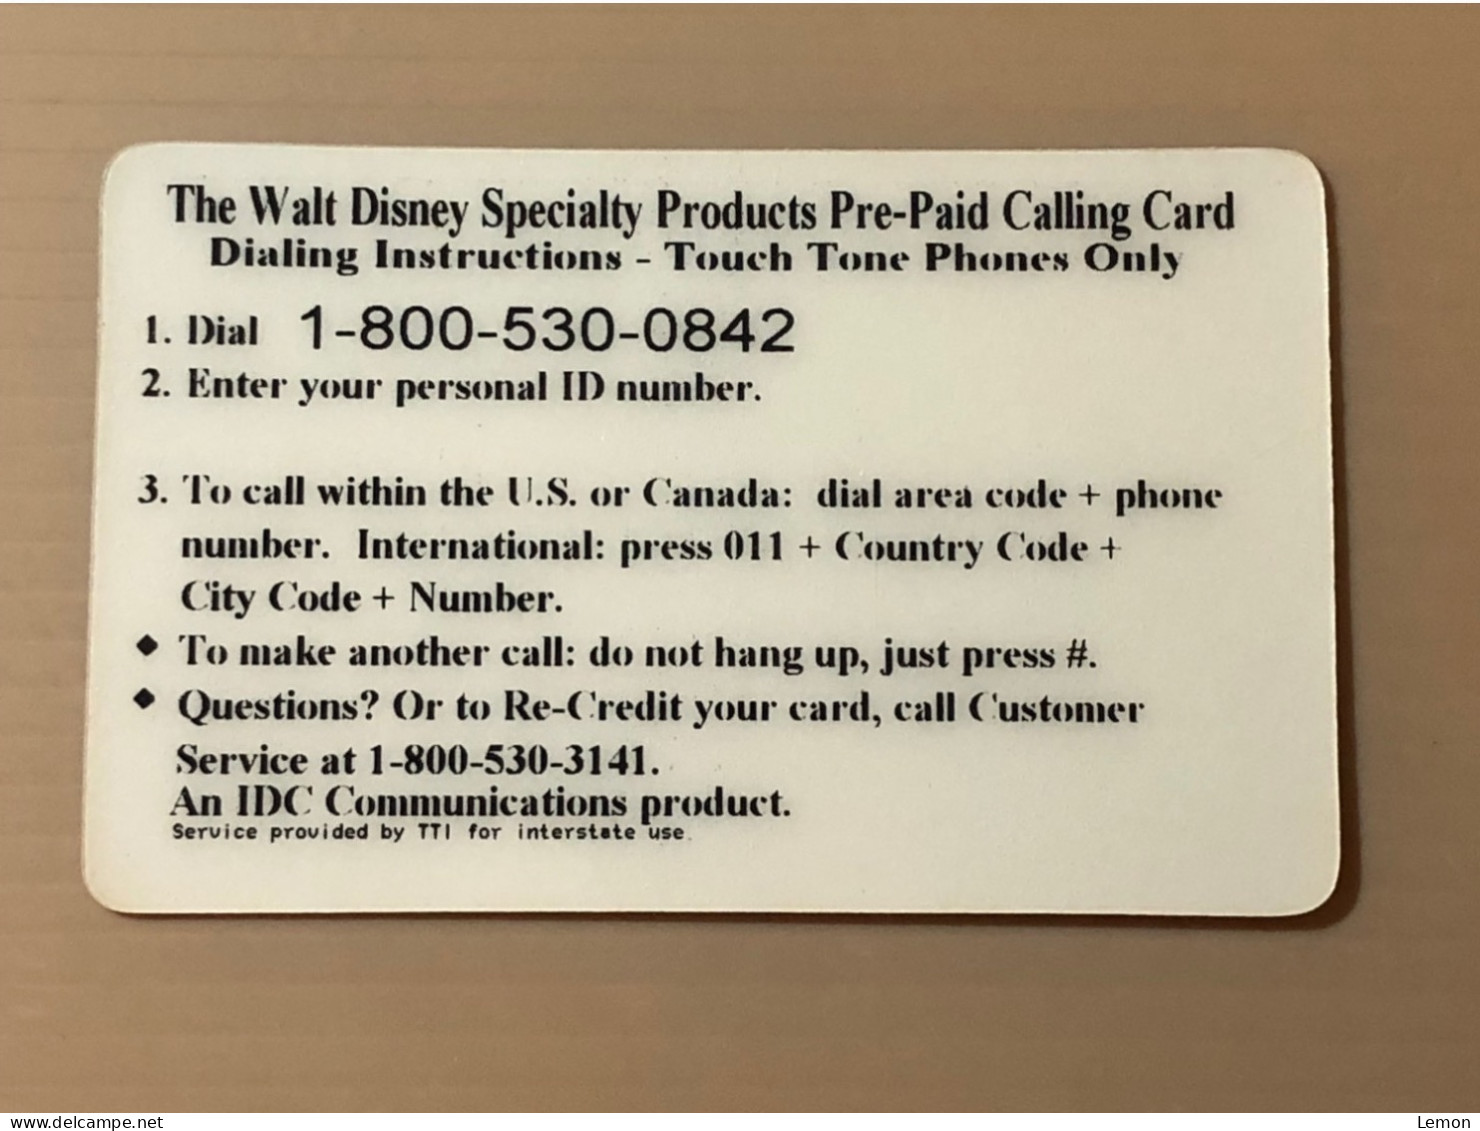 Mint USA UNITED STATES America Prepaid Telecard Phonecard, WALT DISNEY Specialty Product SAMPLE CARD, Set Of 1 Mint Card - Colecciones